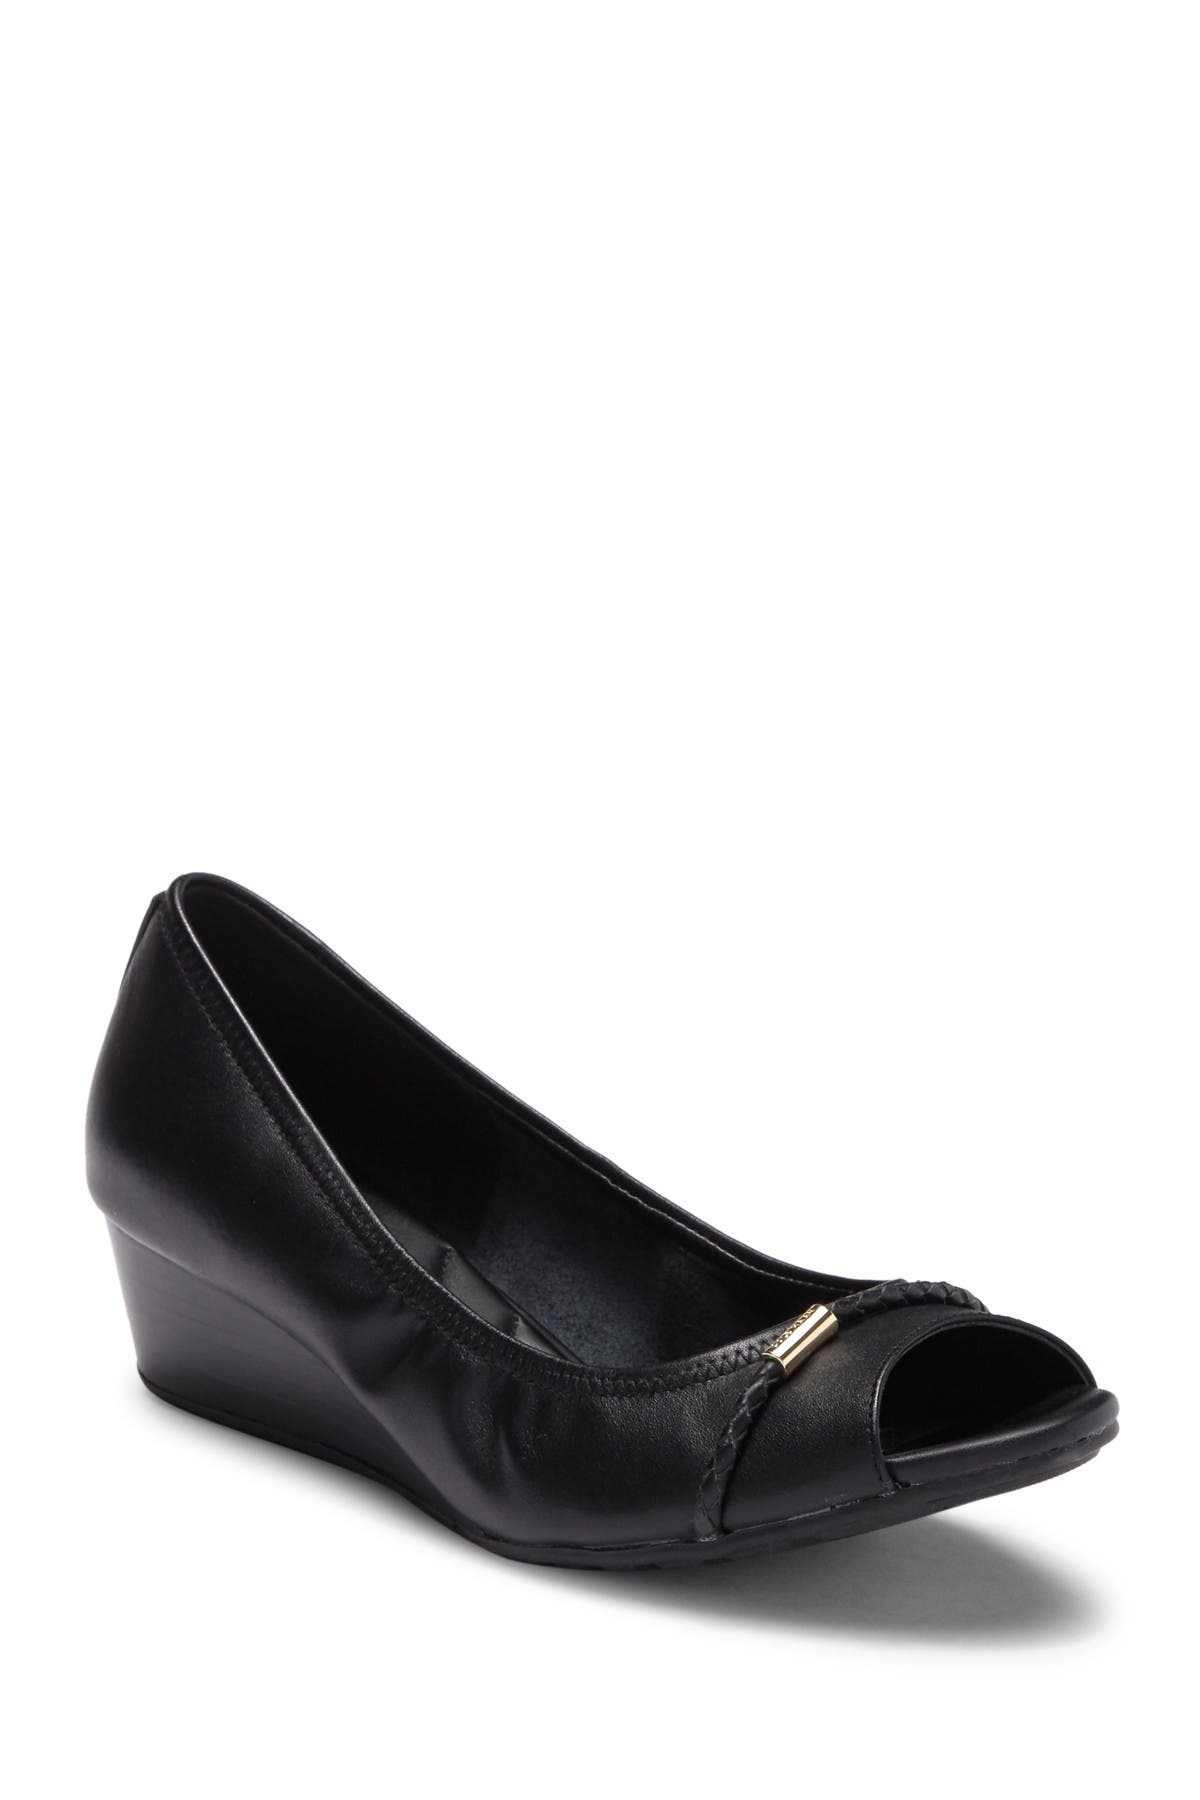 Cole Haan | Emory Leather Wedge Pump 